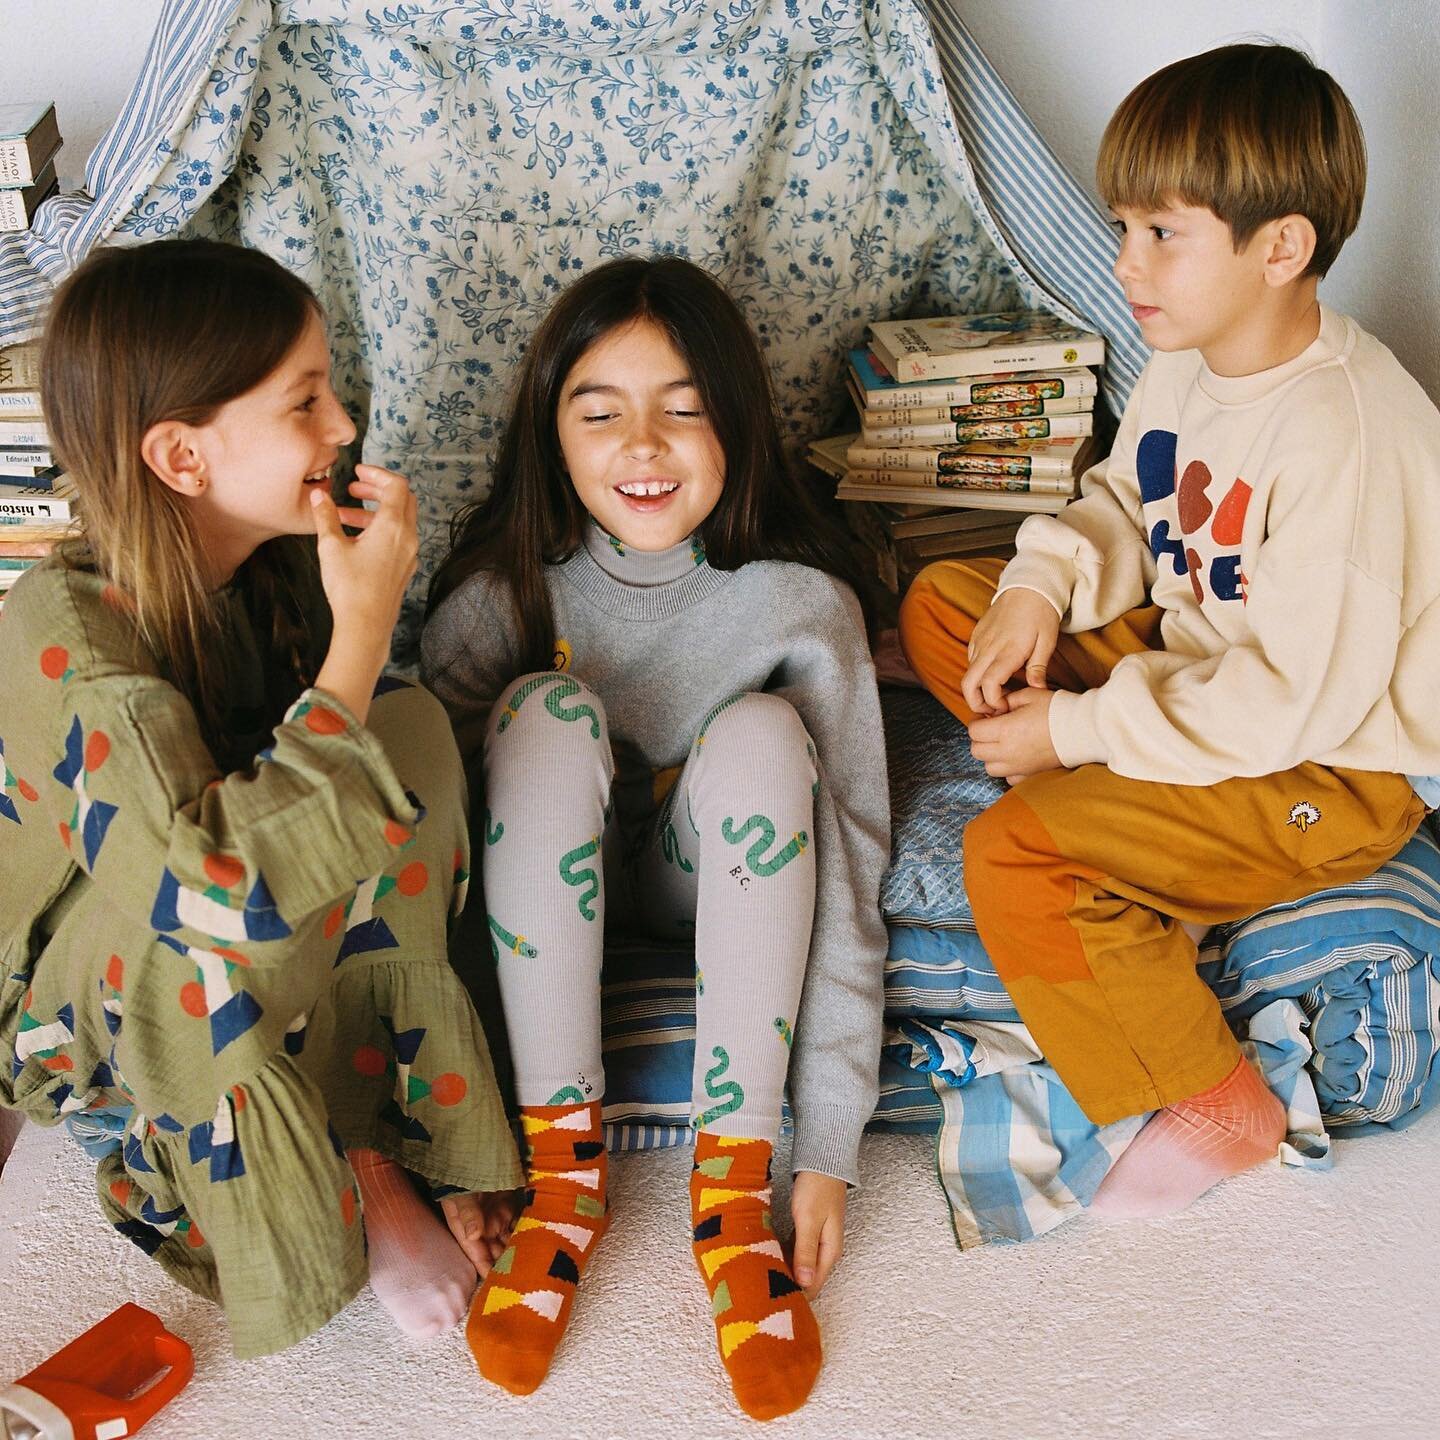 New styles from the Bobo Choses AW21 collection, Talking Bobo, are now available!

DM us to find your nearest @_bobochoses_ retailer 💛

#bobochoses #bobochosestalkingbobo #bobo #aw21 #drop2 #awfashion #kidsfashion #sustainablefashion #sustainablesty